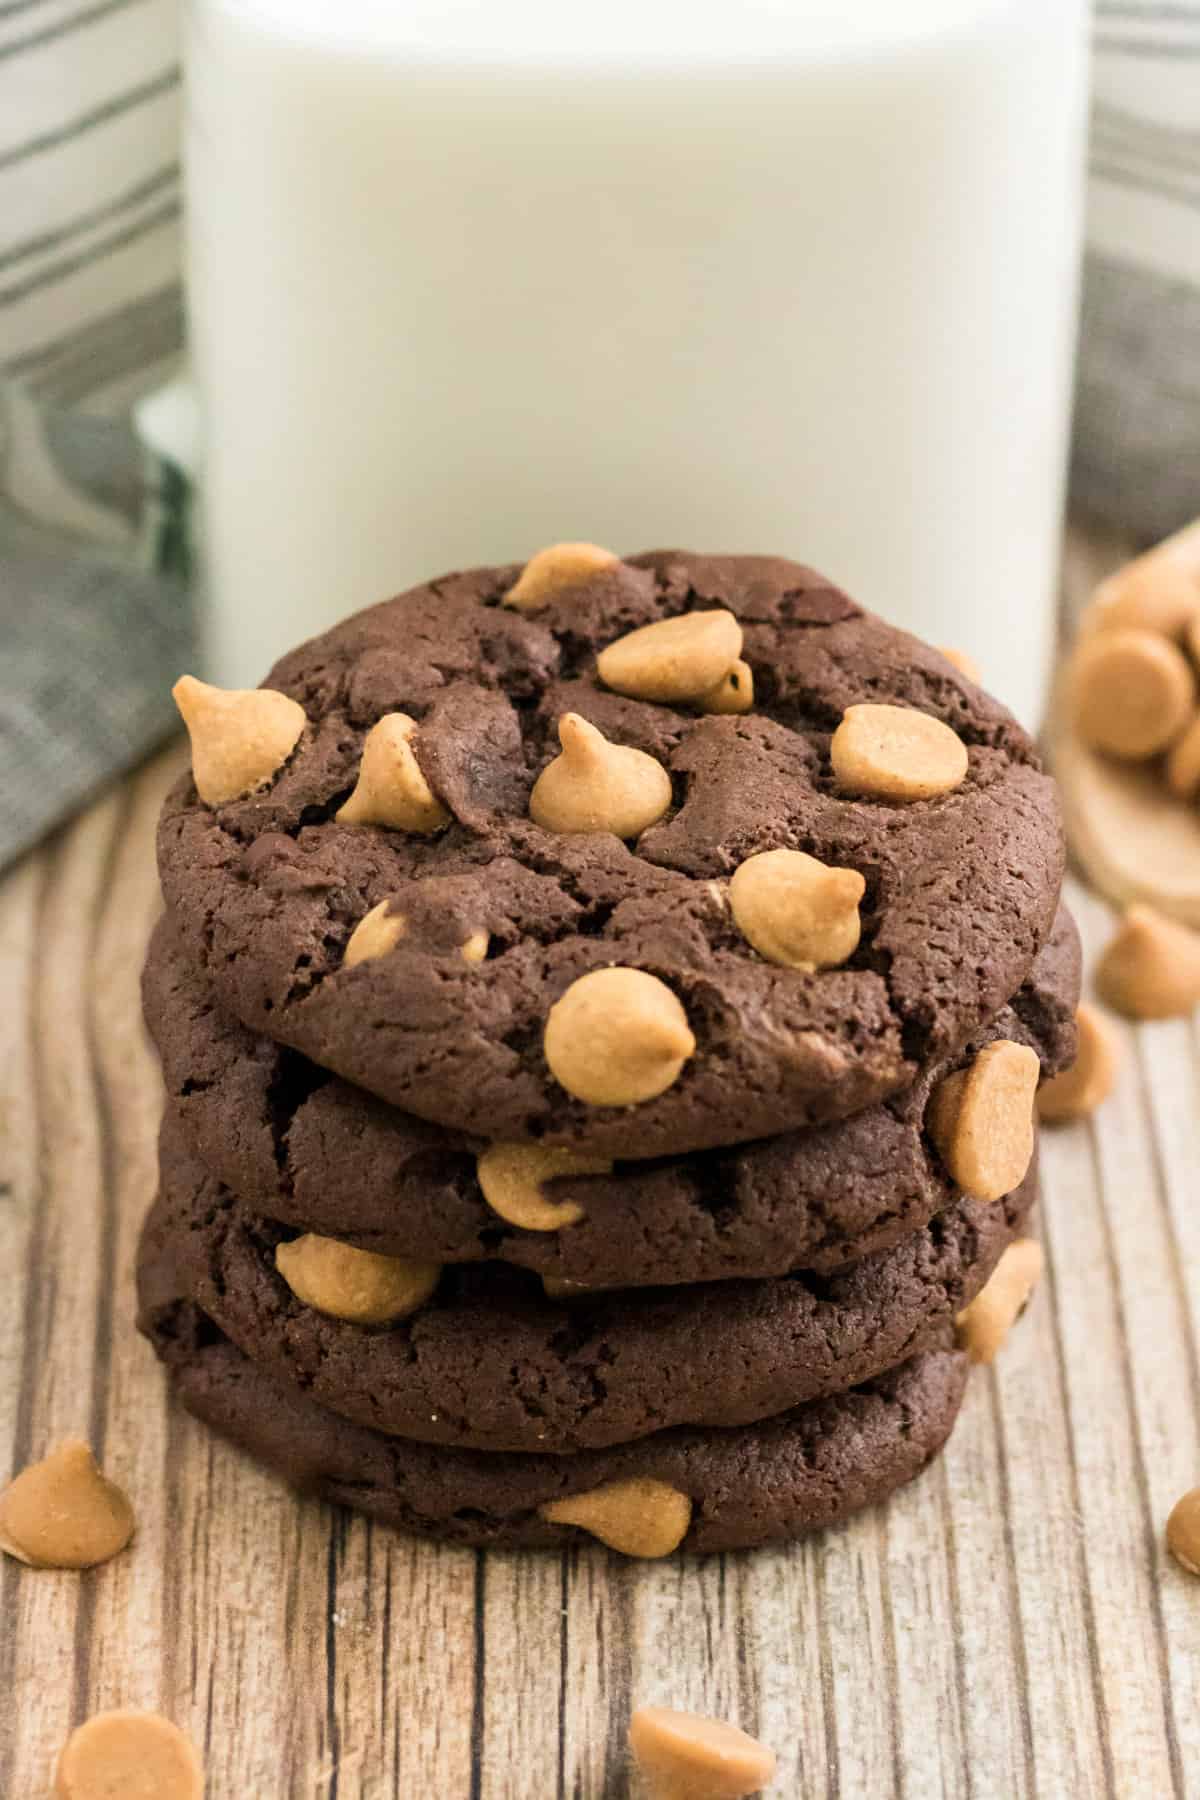 Chocolate cookies with peanut butter chips stacked on top of each other in front of a glass of milk.